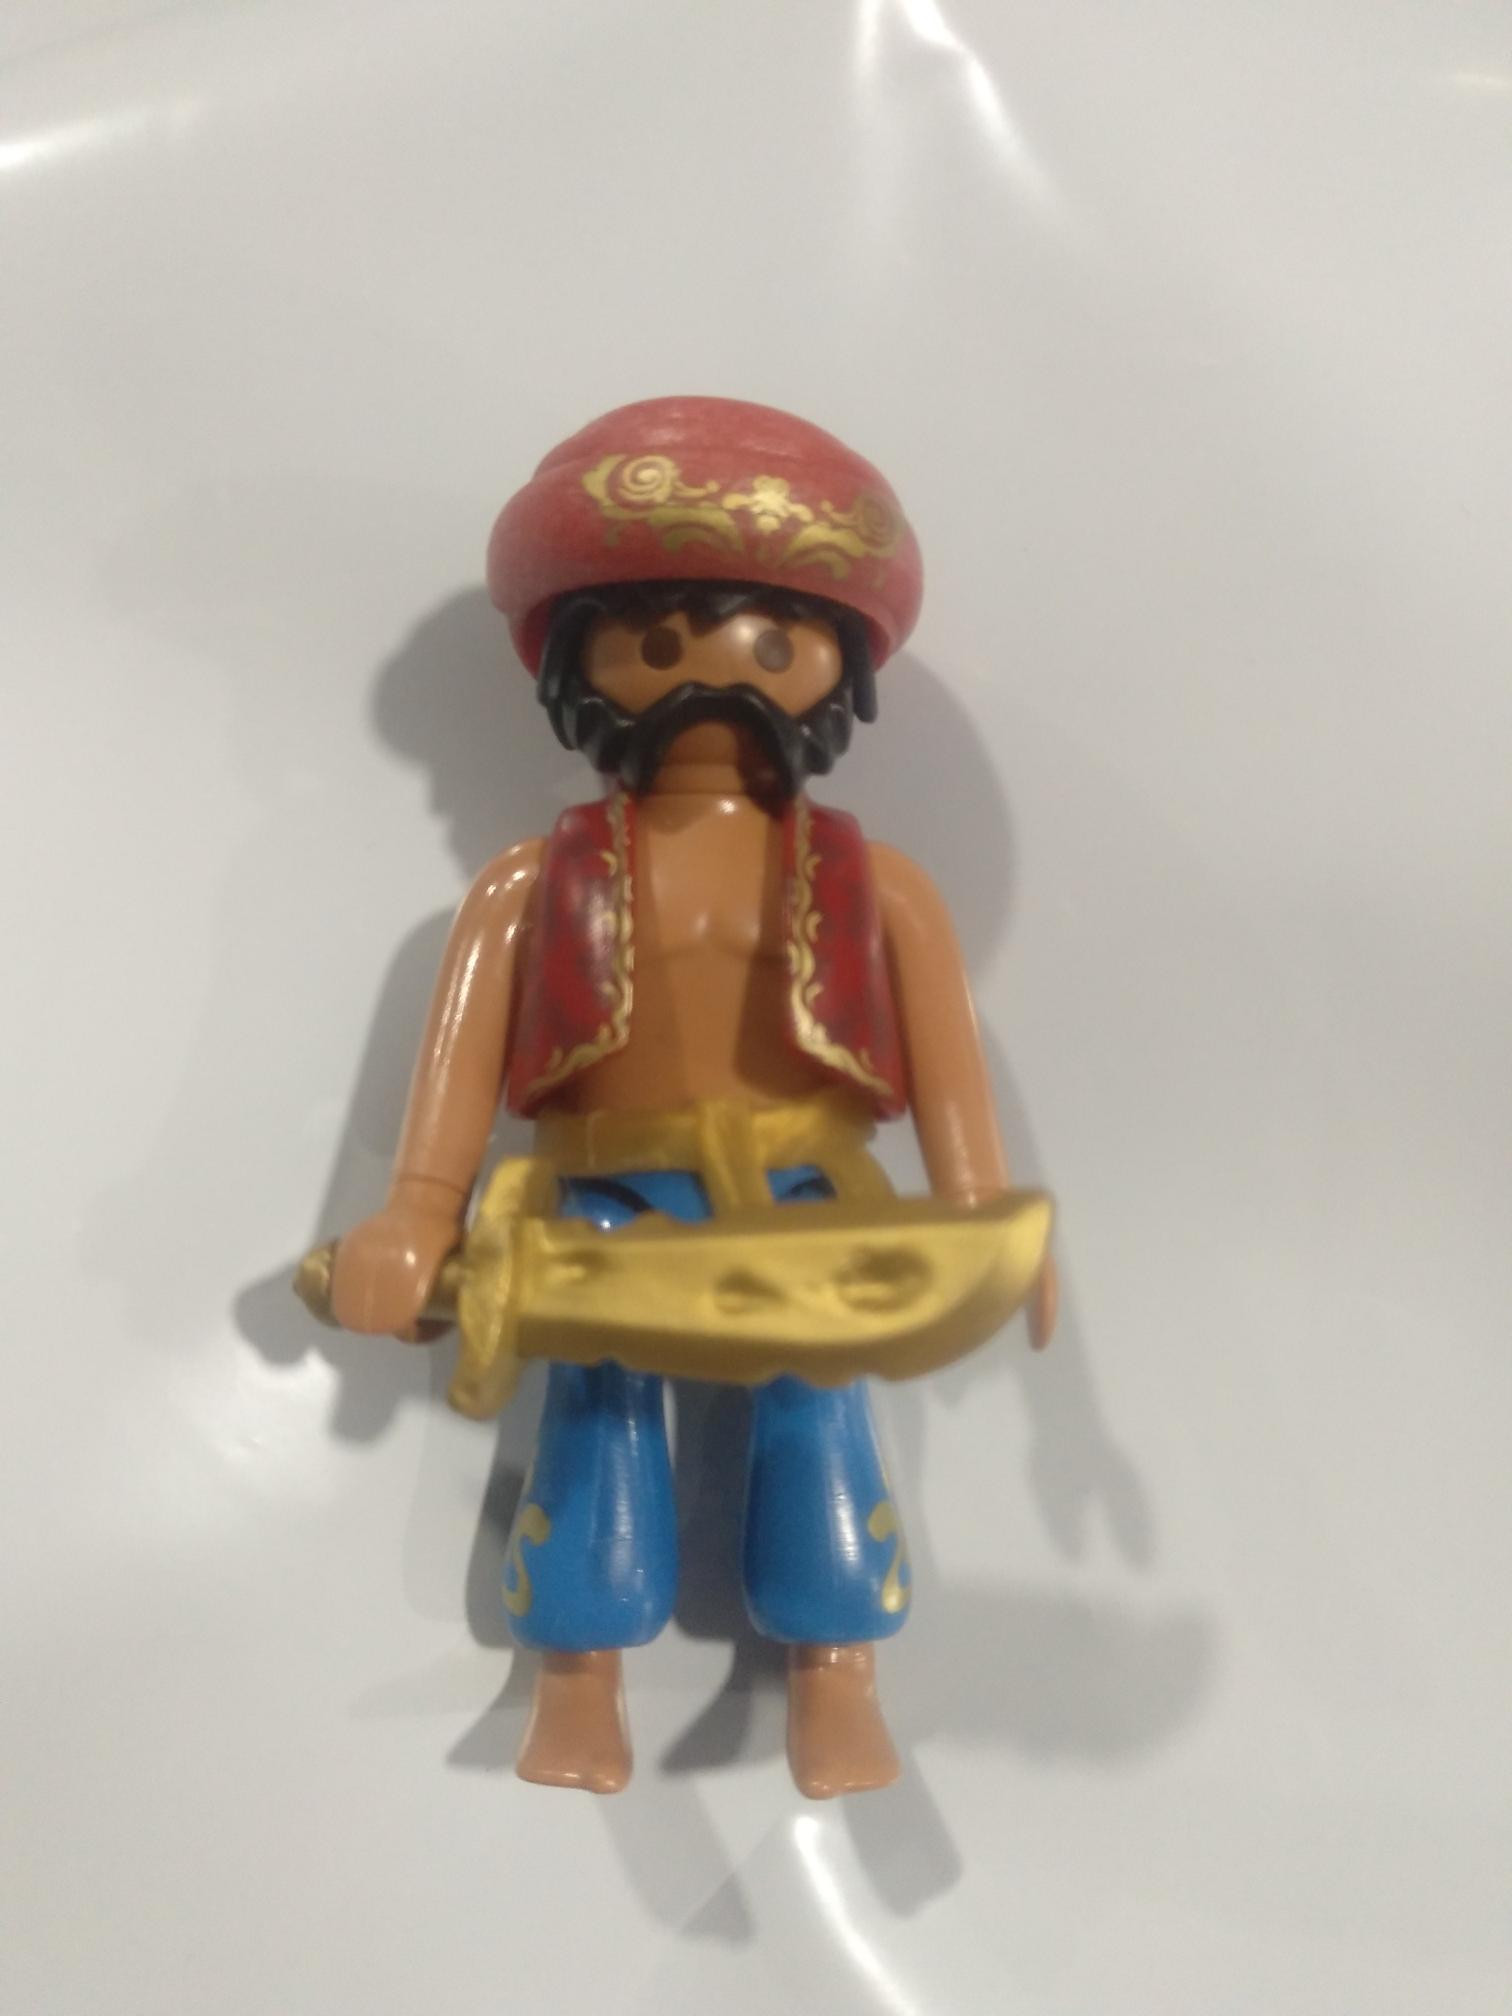 PLAYMOBIL @@ PERSONNAGE @@ HOMME @@ CUSTOM @@ BUSTE CORPS NOIR @@ BUST @@ 25 